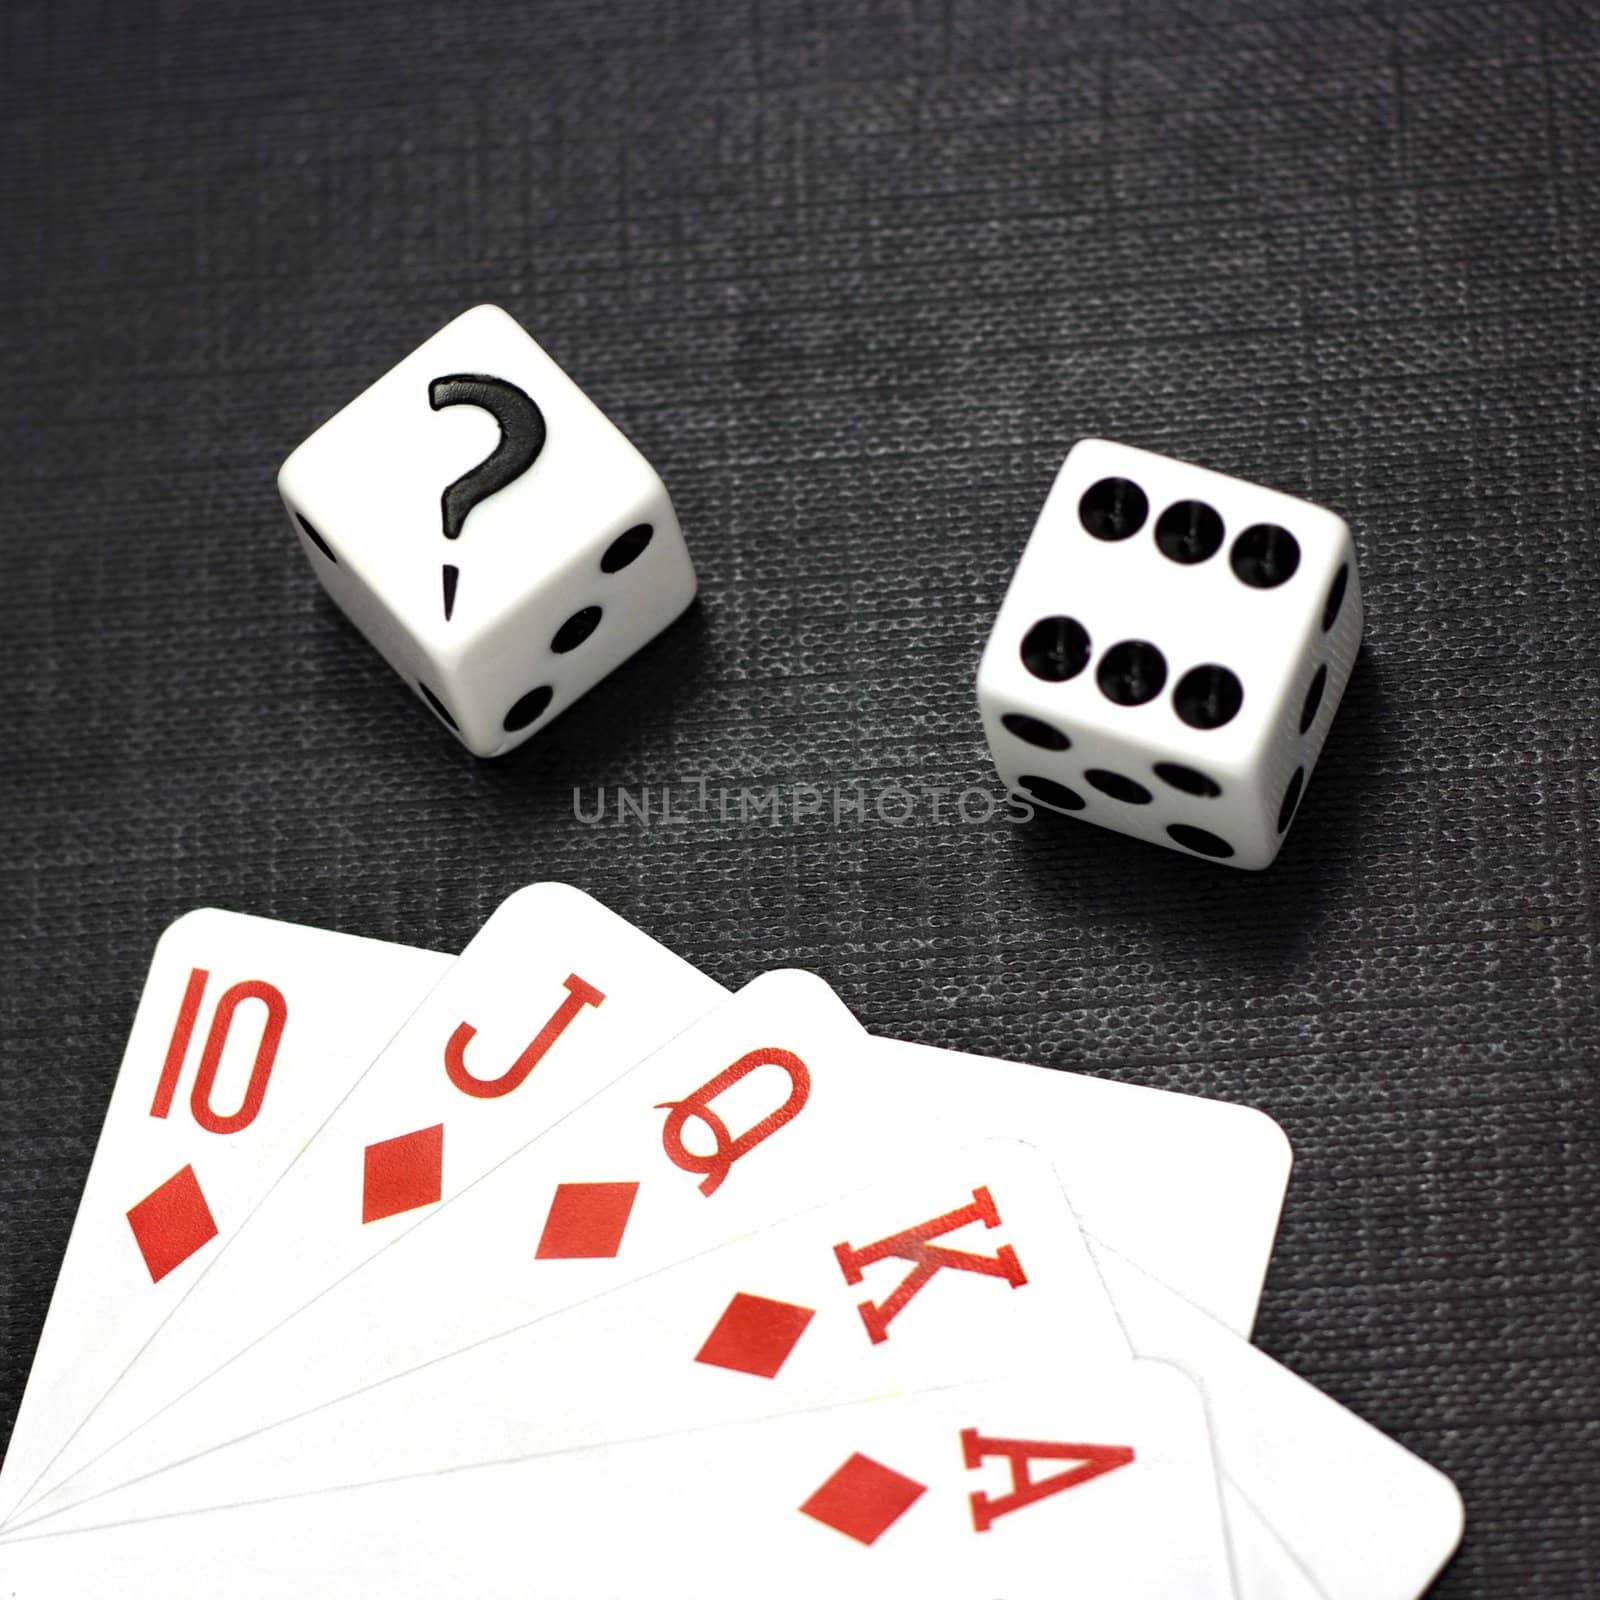 Two white dices and playing cards on a black background